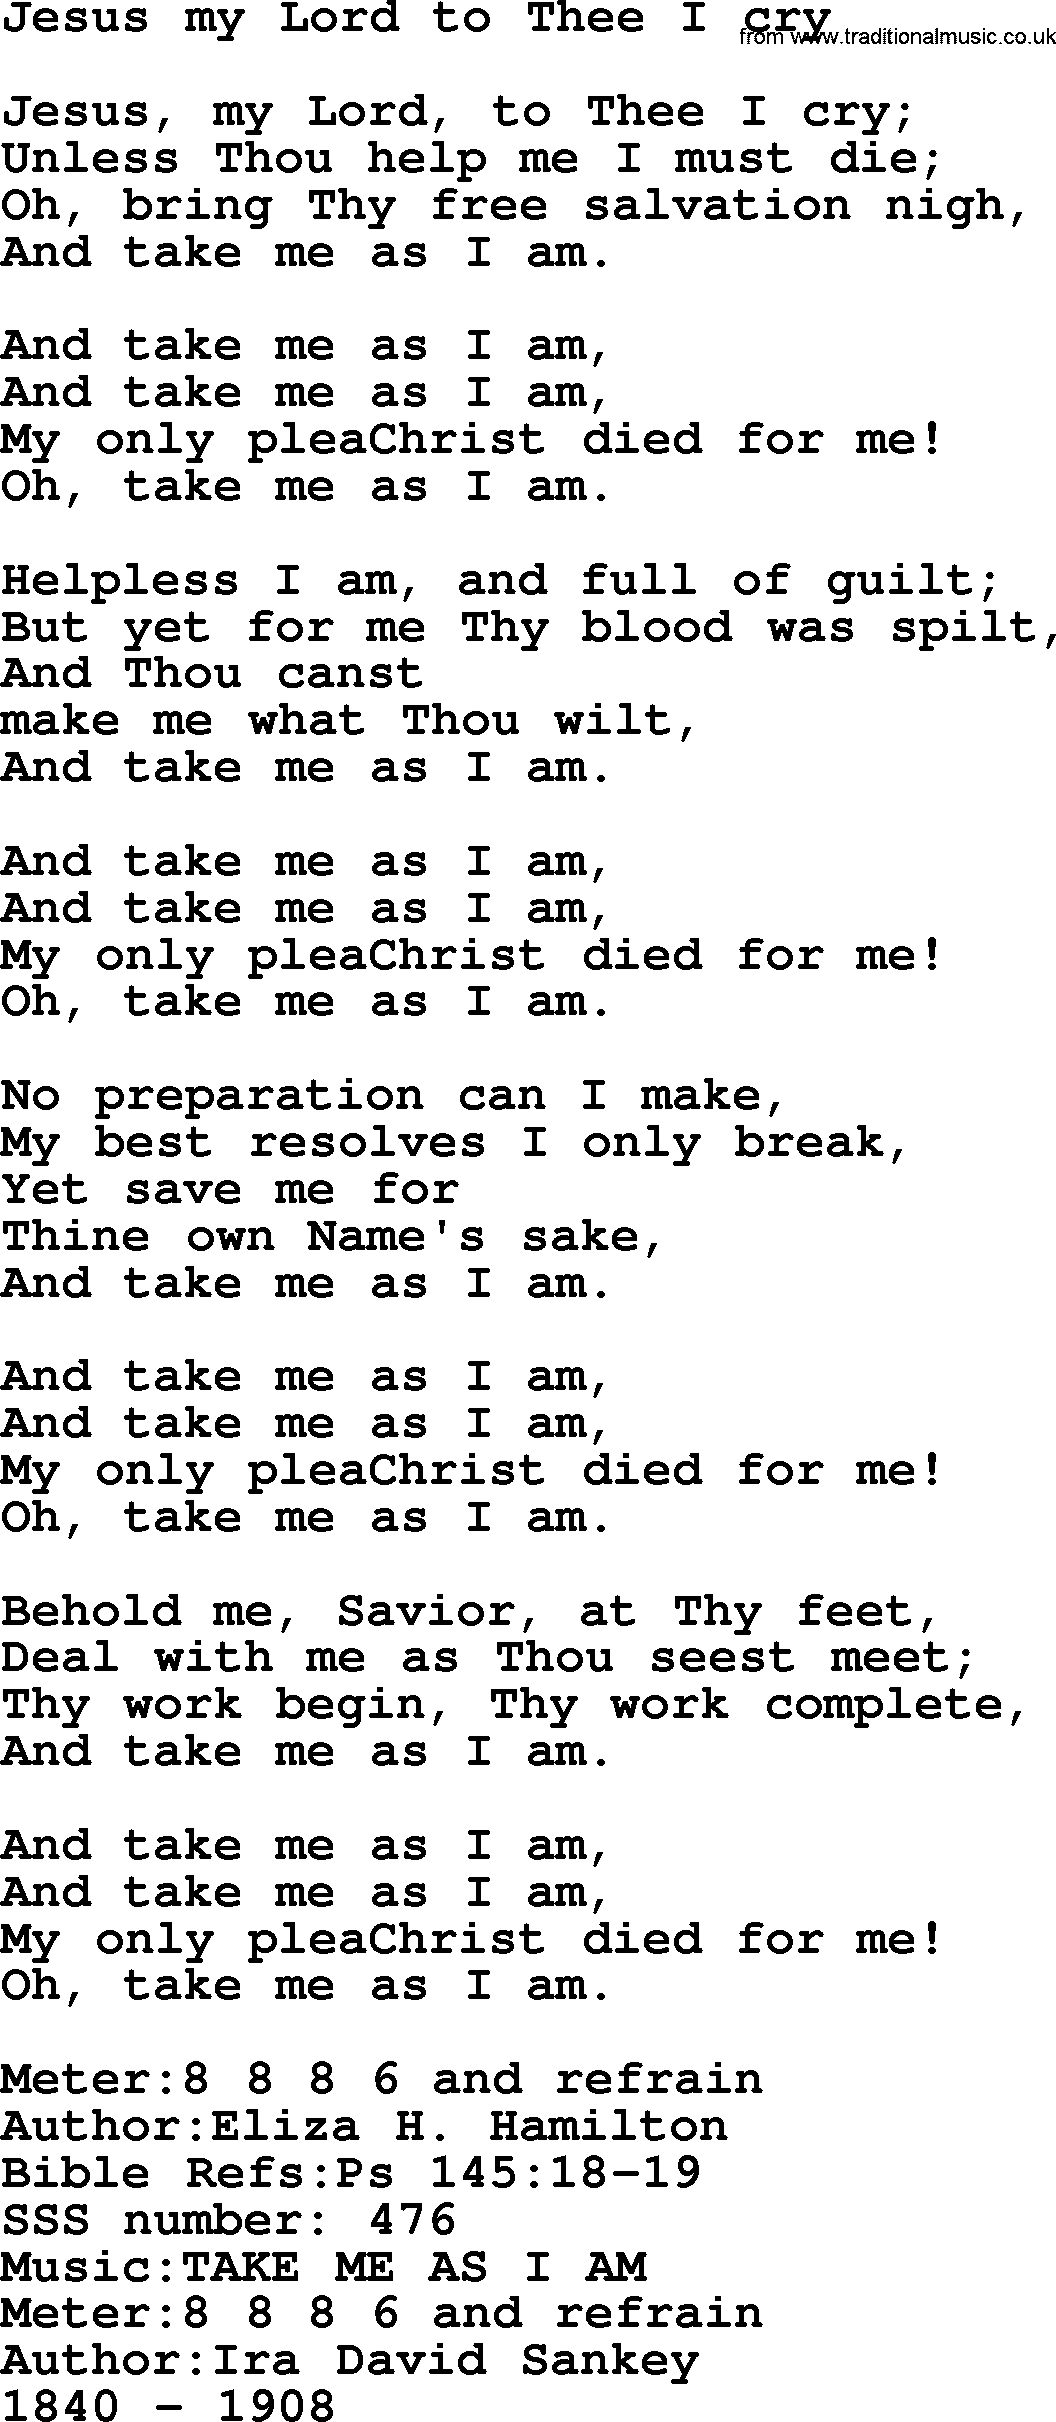 Sacred Songs and Solos complete, 1200 Hymns, title: Jesus My Lord To Thee I Cry, lyrics and PDF